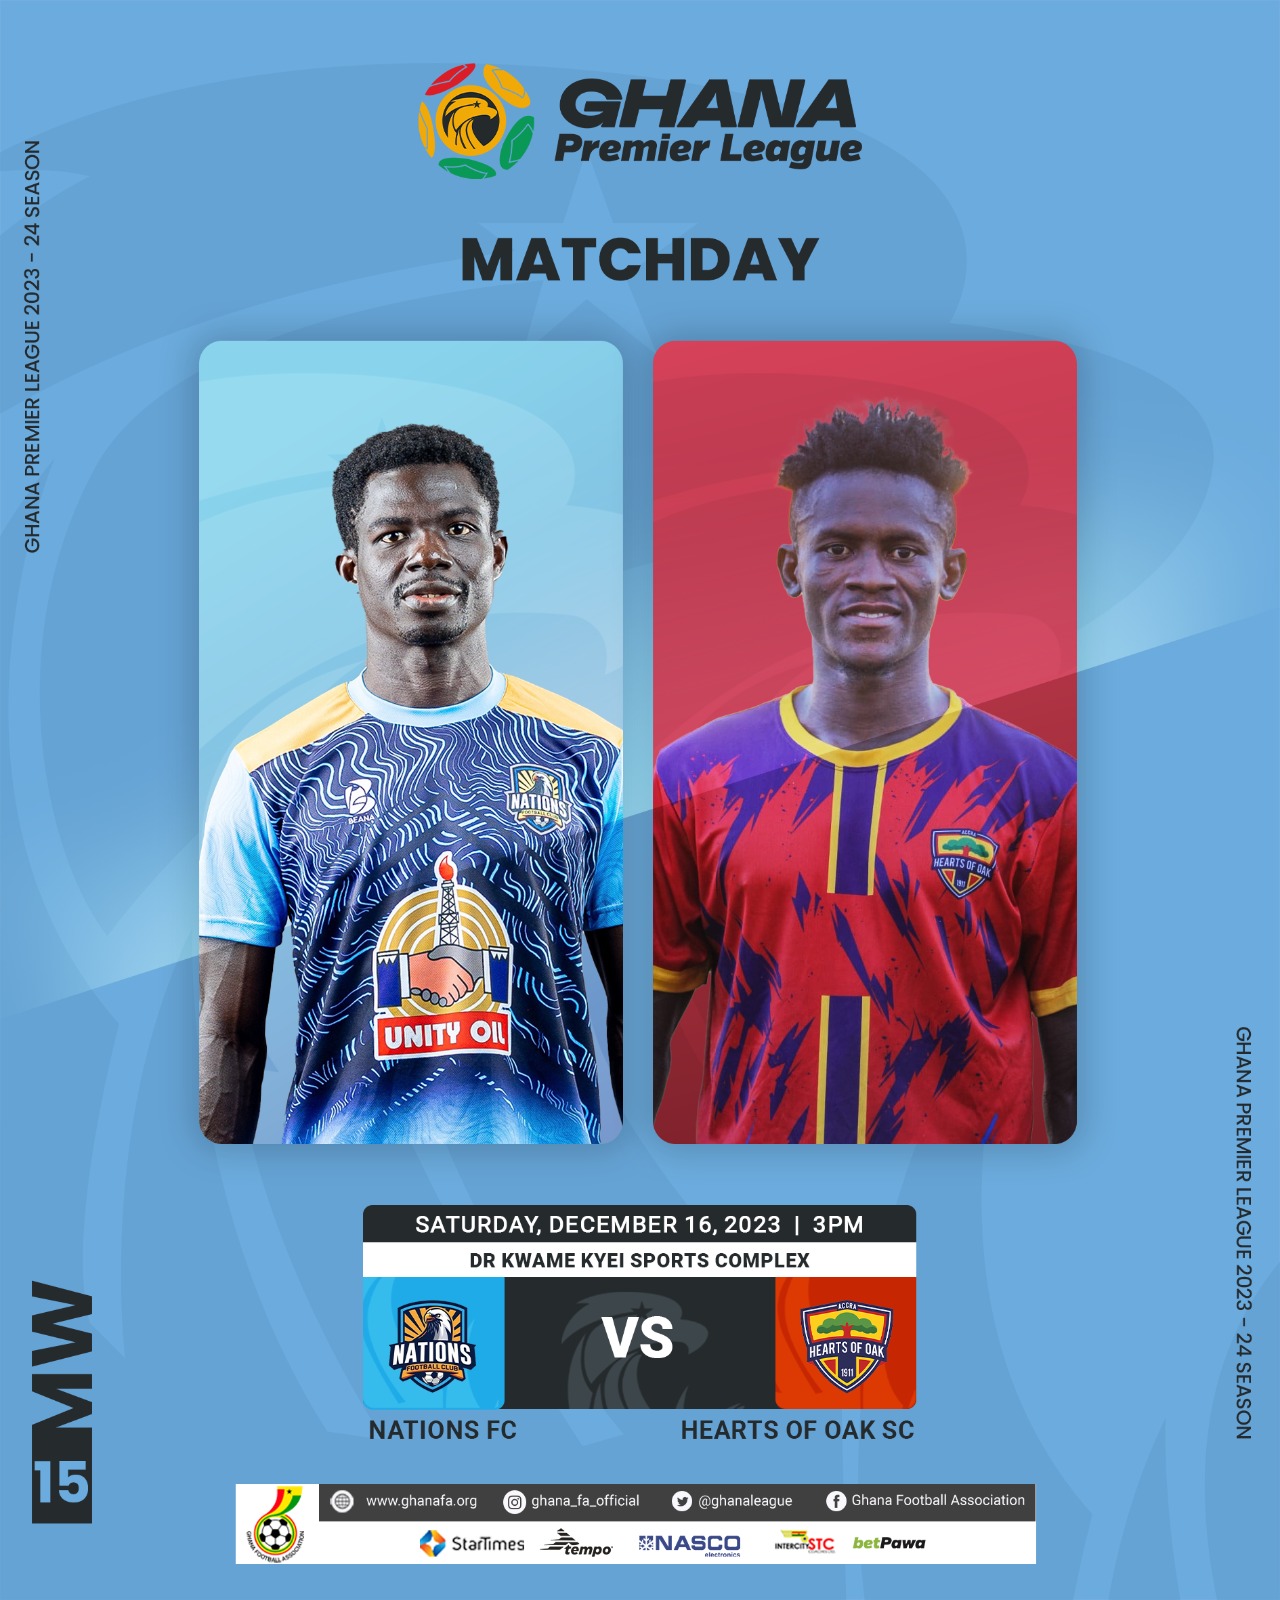 2023/24 GPL: High flying Nations FC lock horns with Hearts of Oak on Saturday